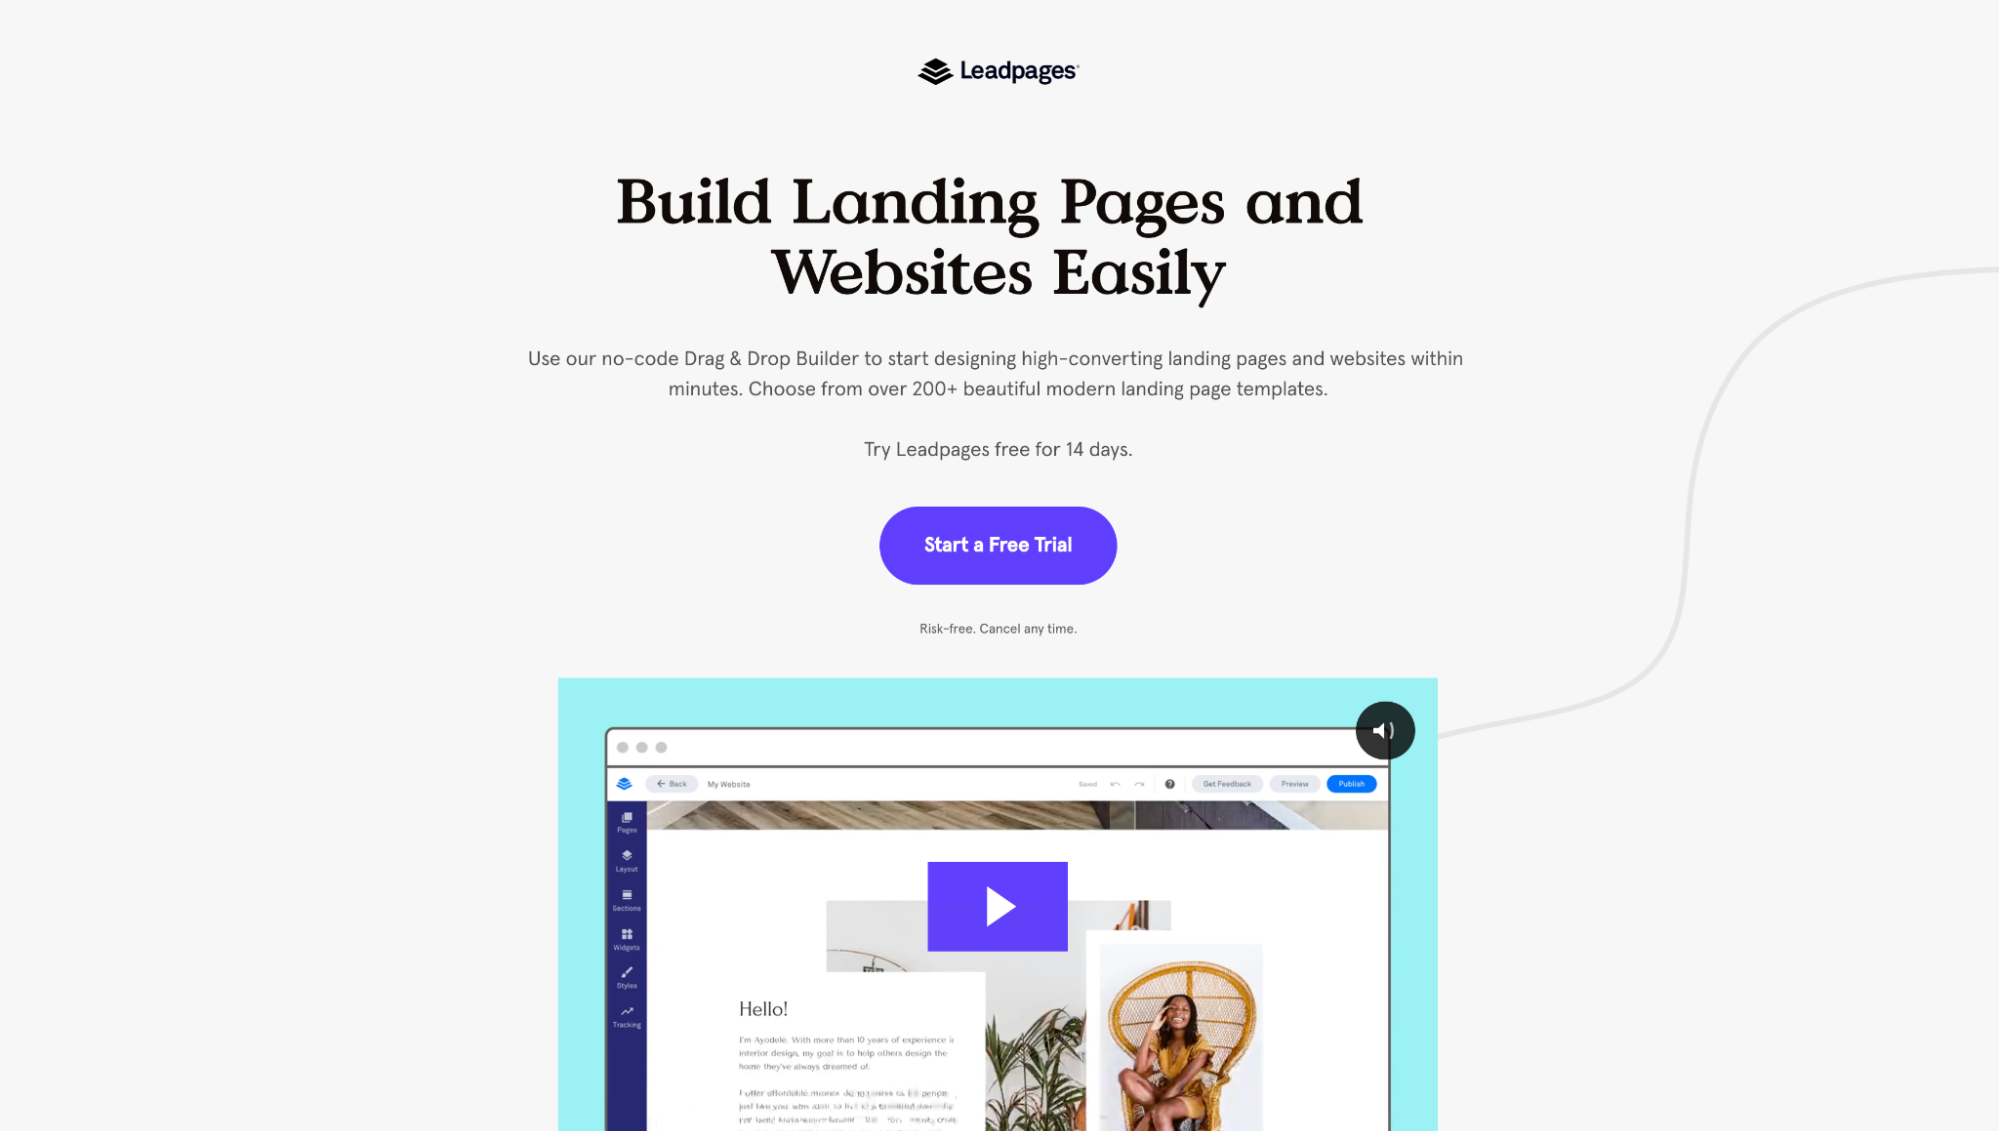 Leadpages conversion goal